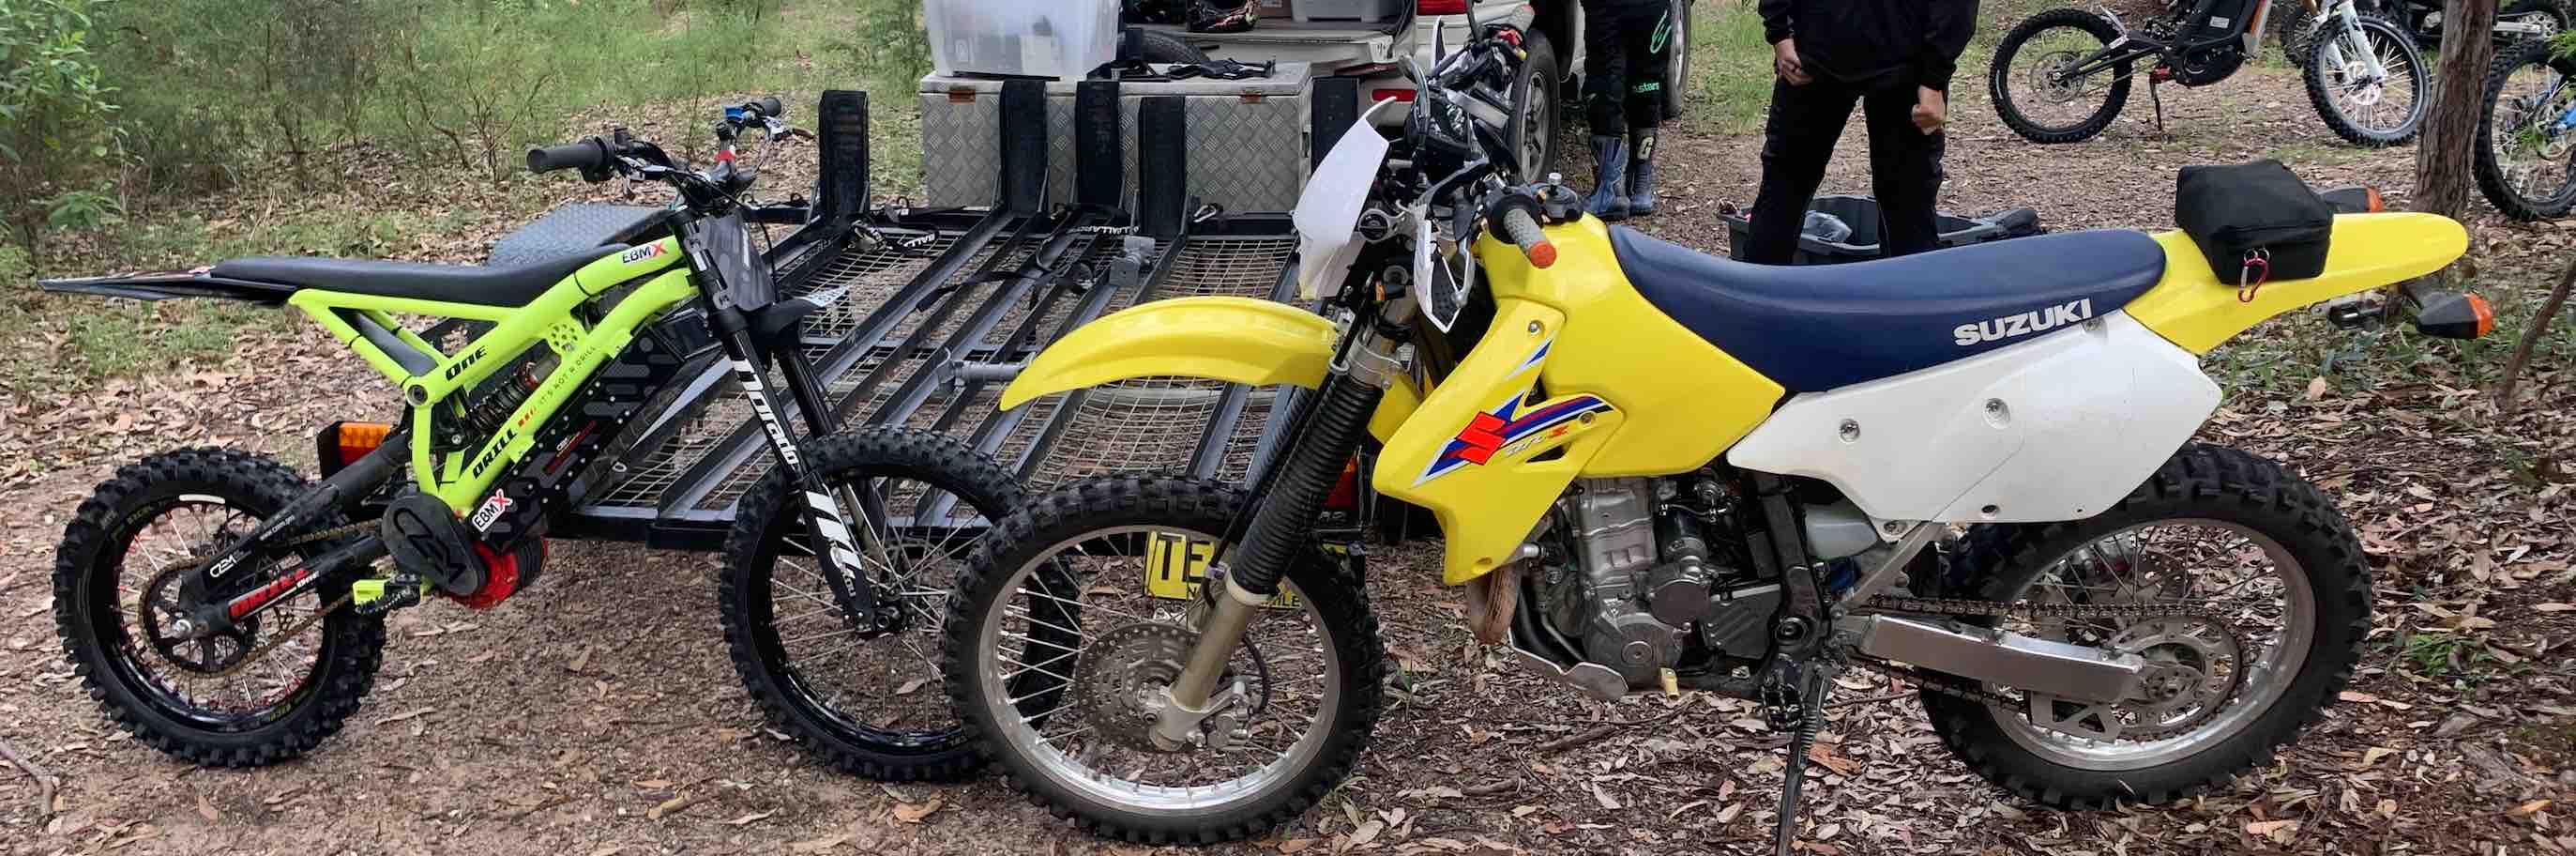 Photo of 2 bikes - DrillOne and DRZ400e